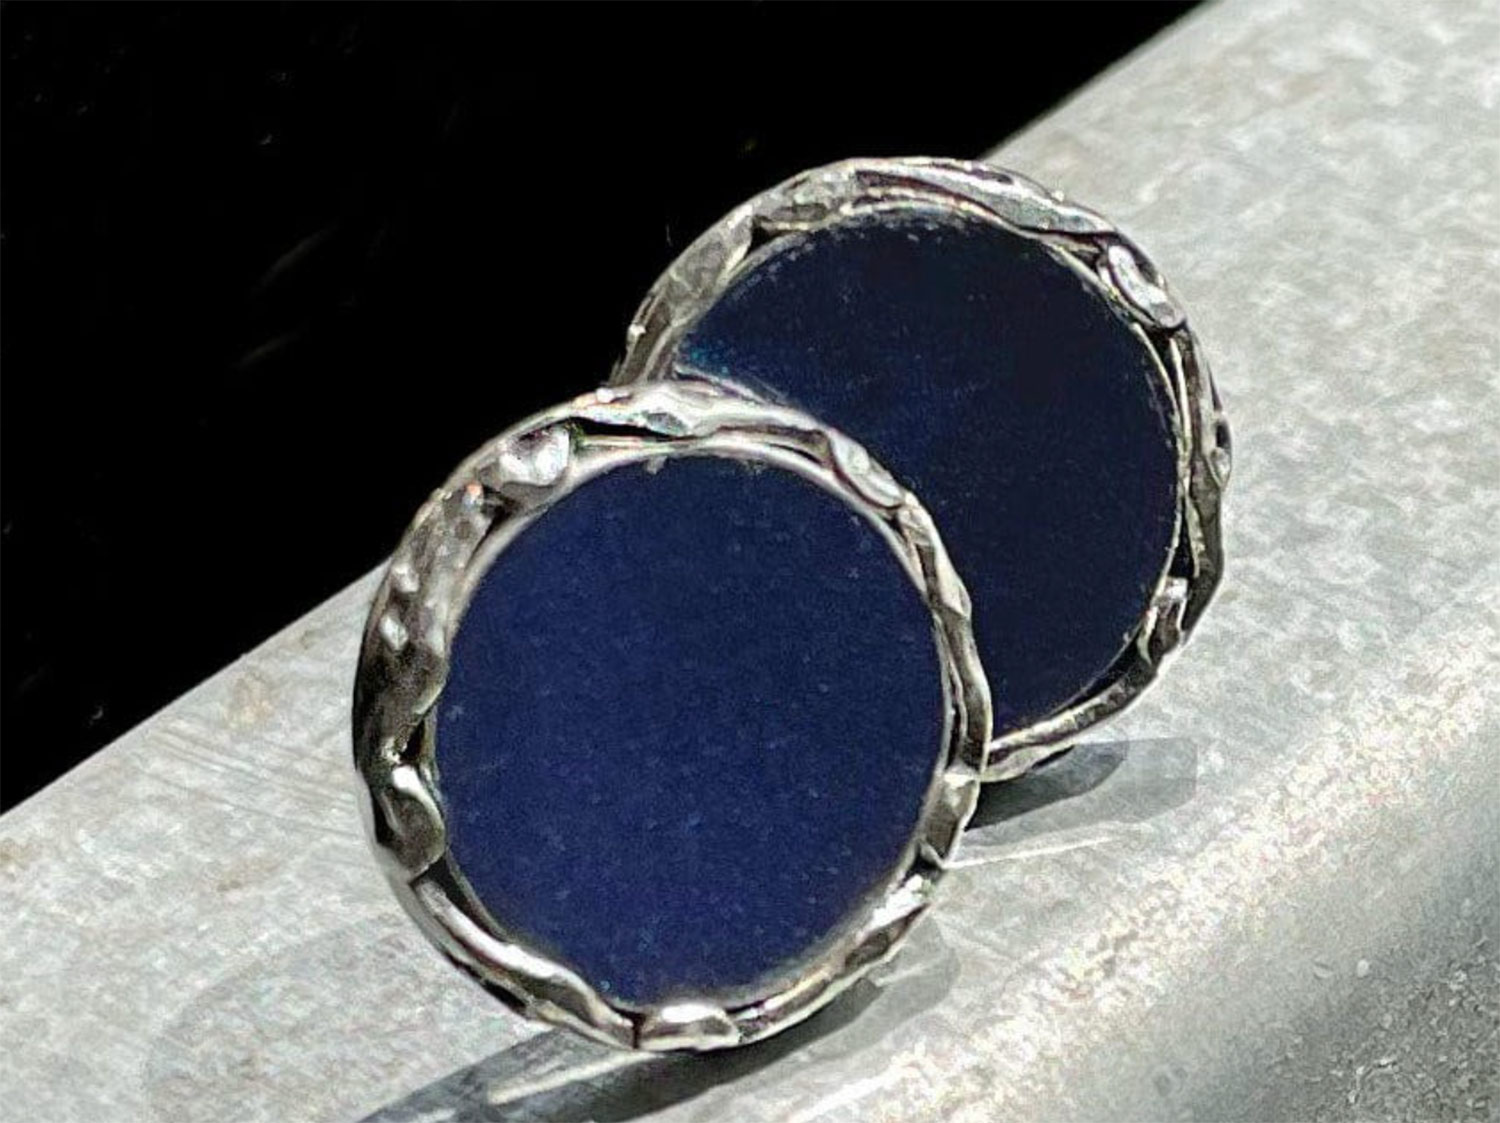 Round earrings with blue in the center and silver rims